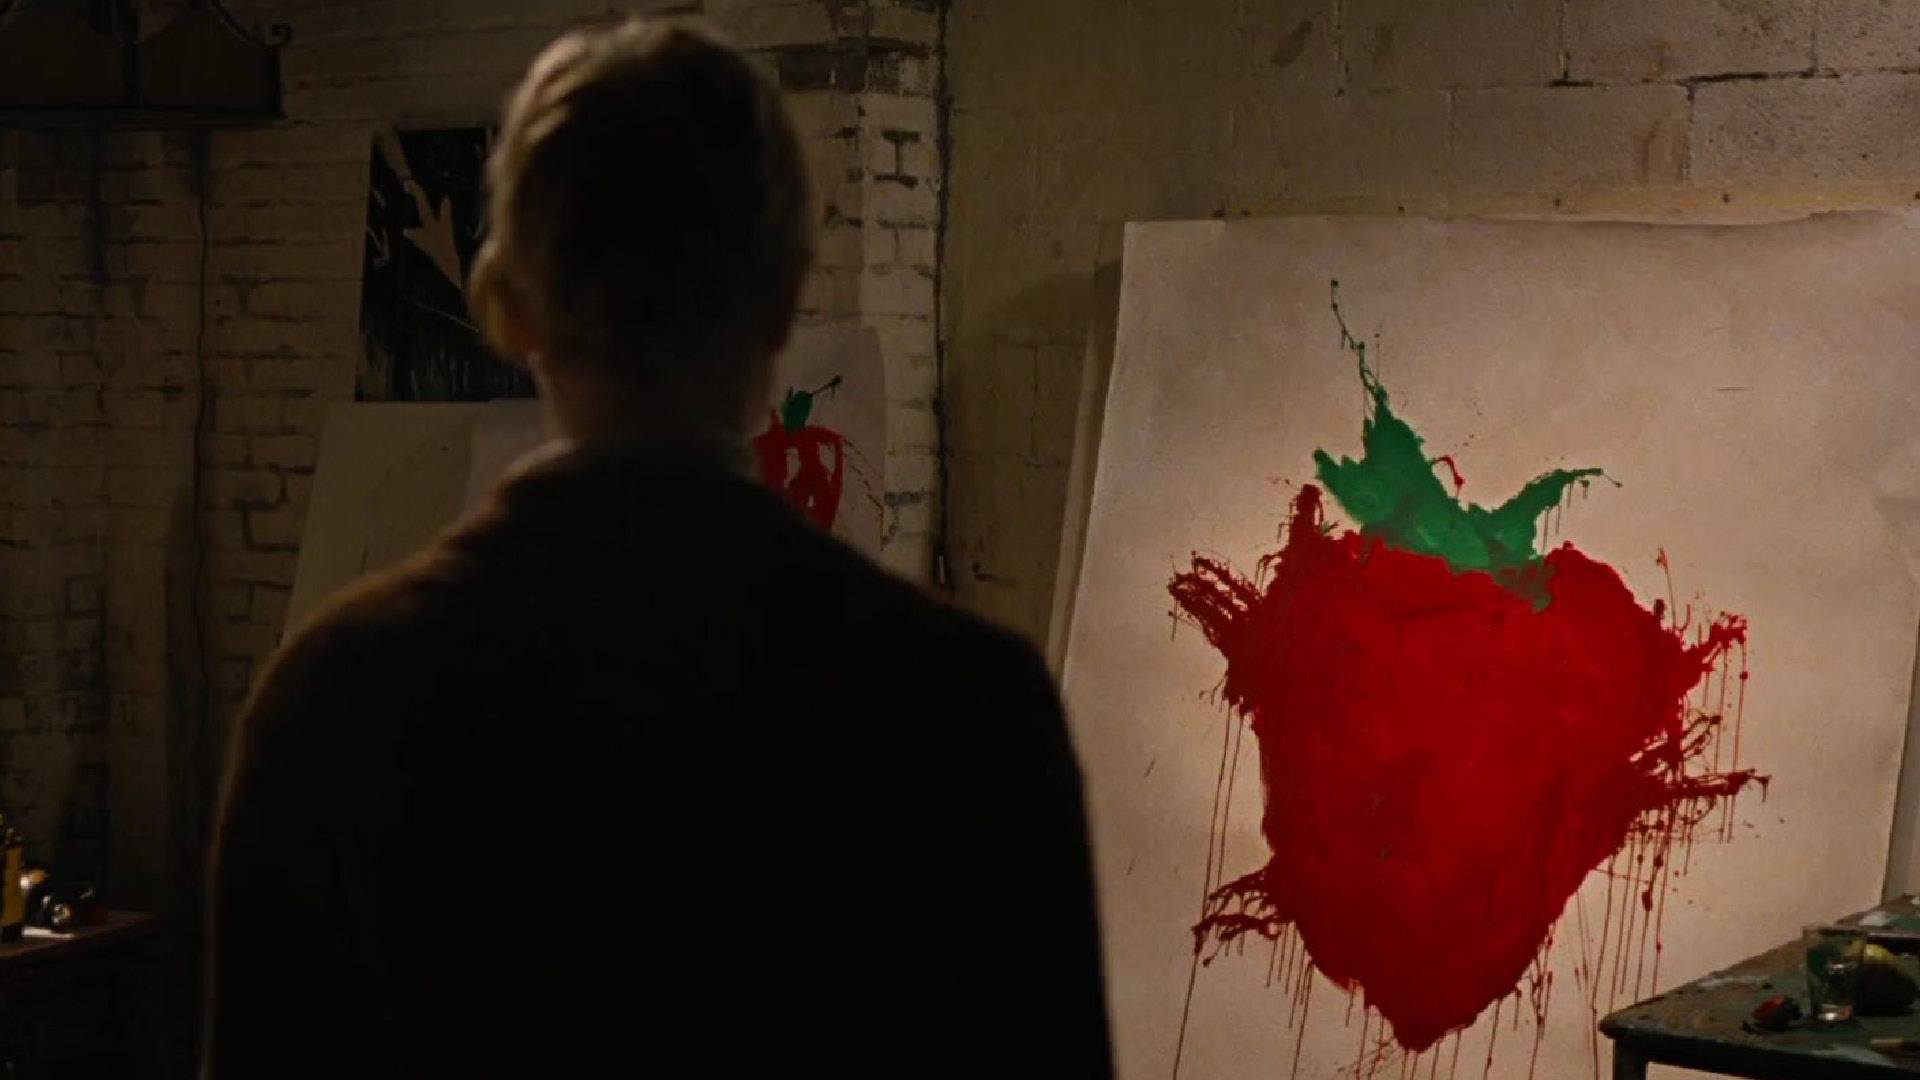 ACROSS THE UNIVERSE film still of a man standing in front of a painting of a strawberry